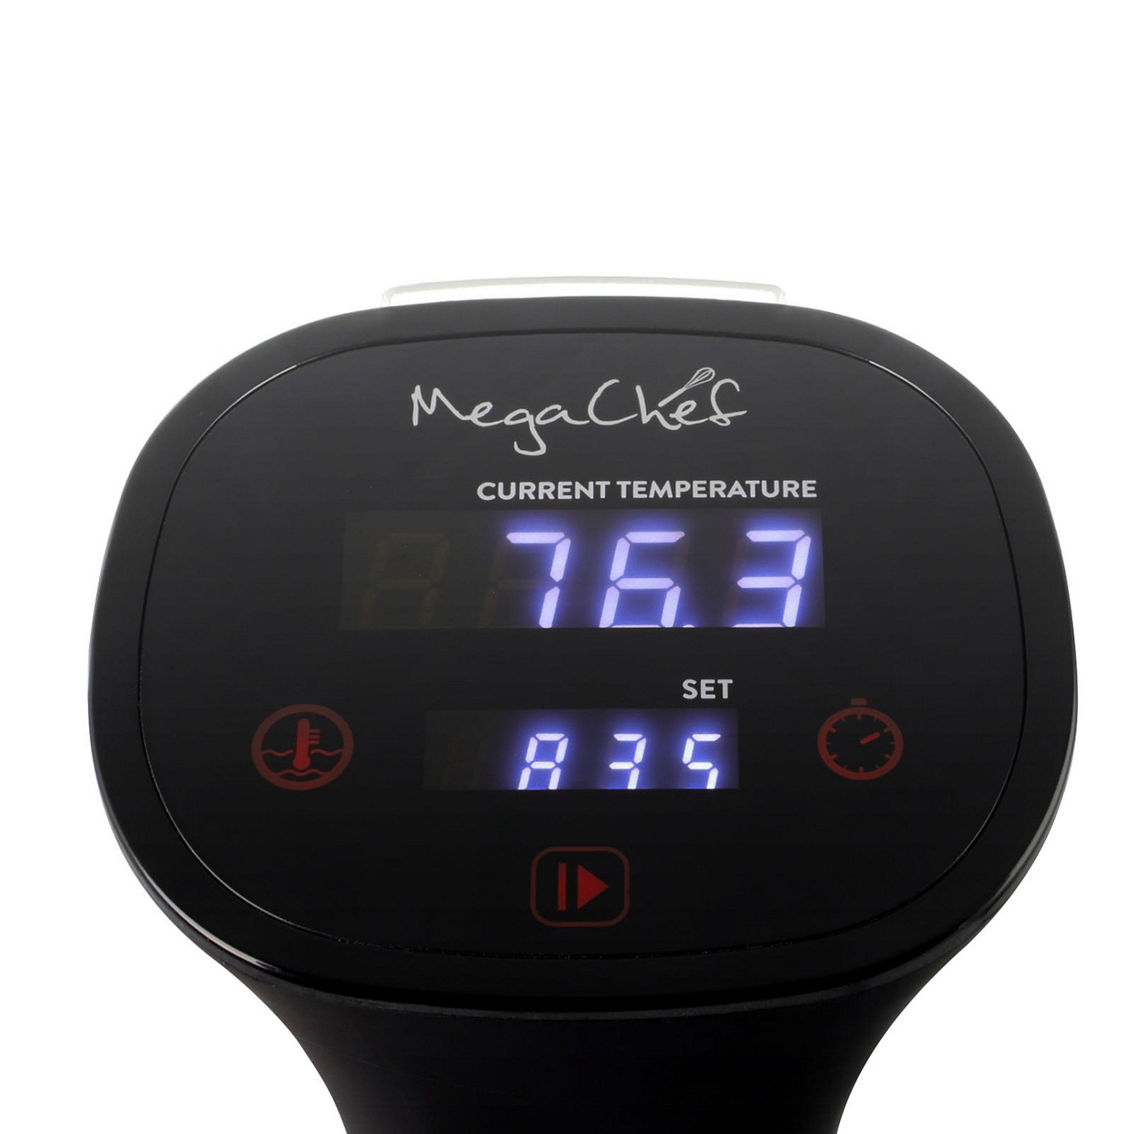 MegaChef Immersion Circulation Precision Sous-Vide Cooker With Digital Touchscre - Image 5 of 5